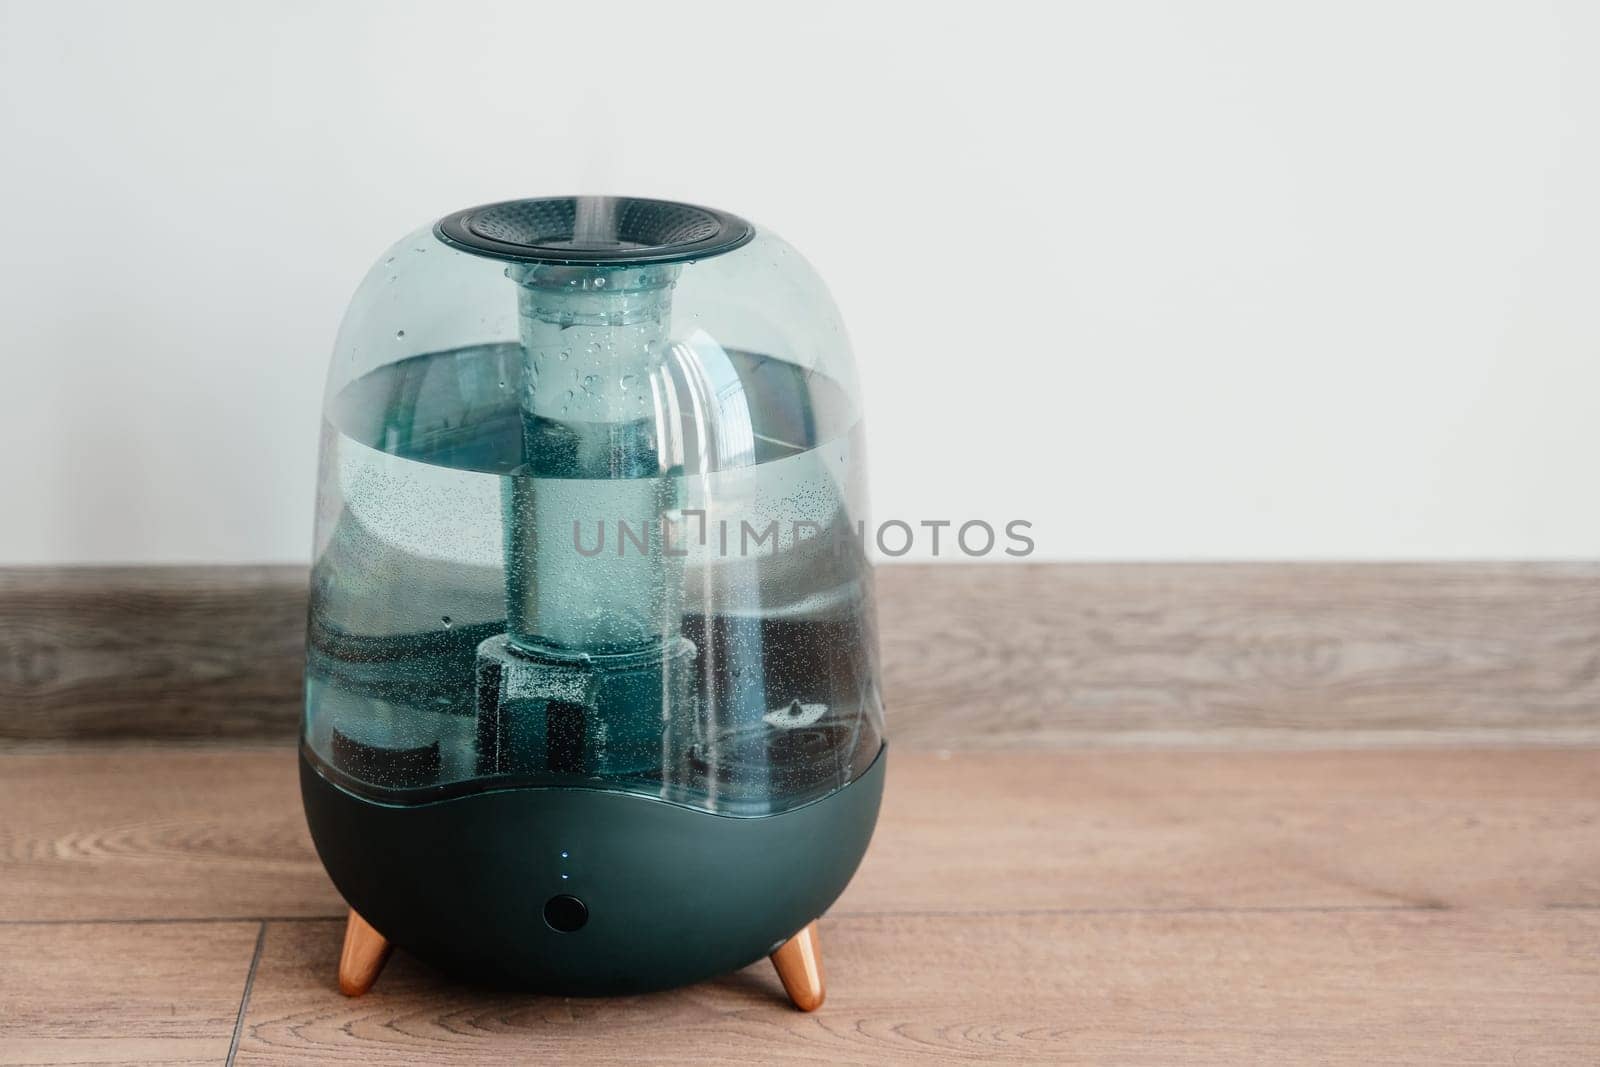 Modern air humidifier on a white wall background. Humidifier spreading steam into the living room.